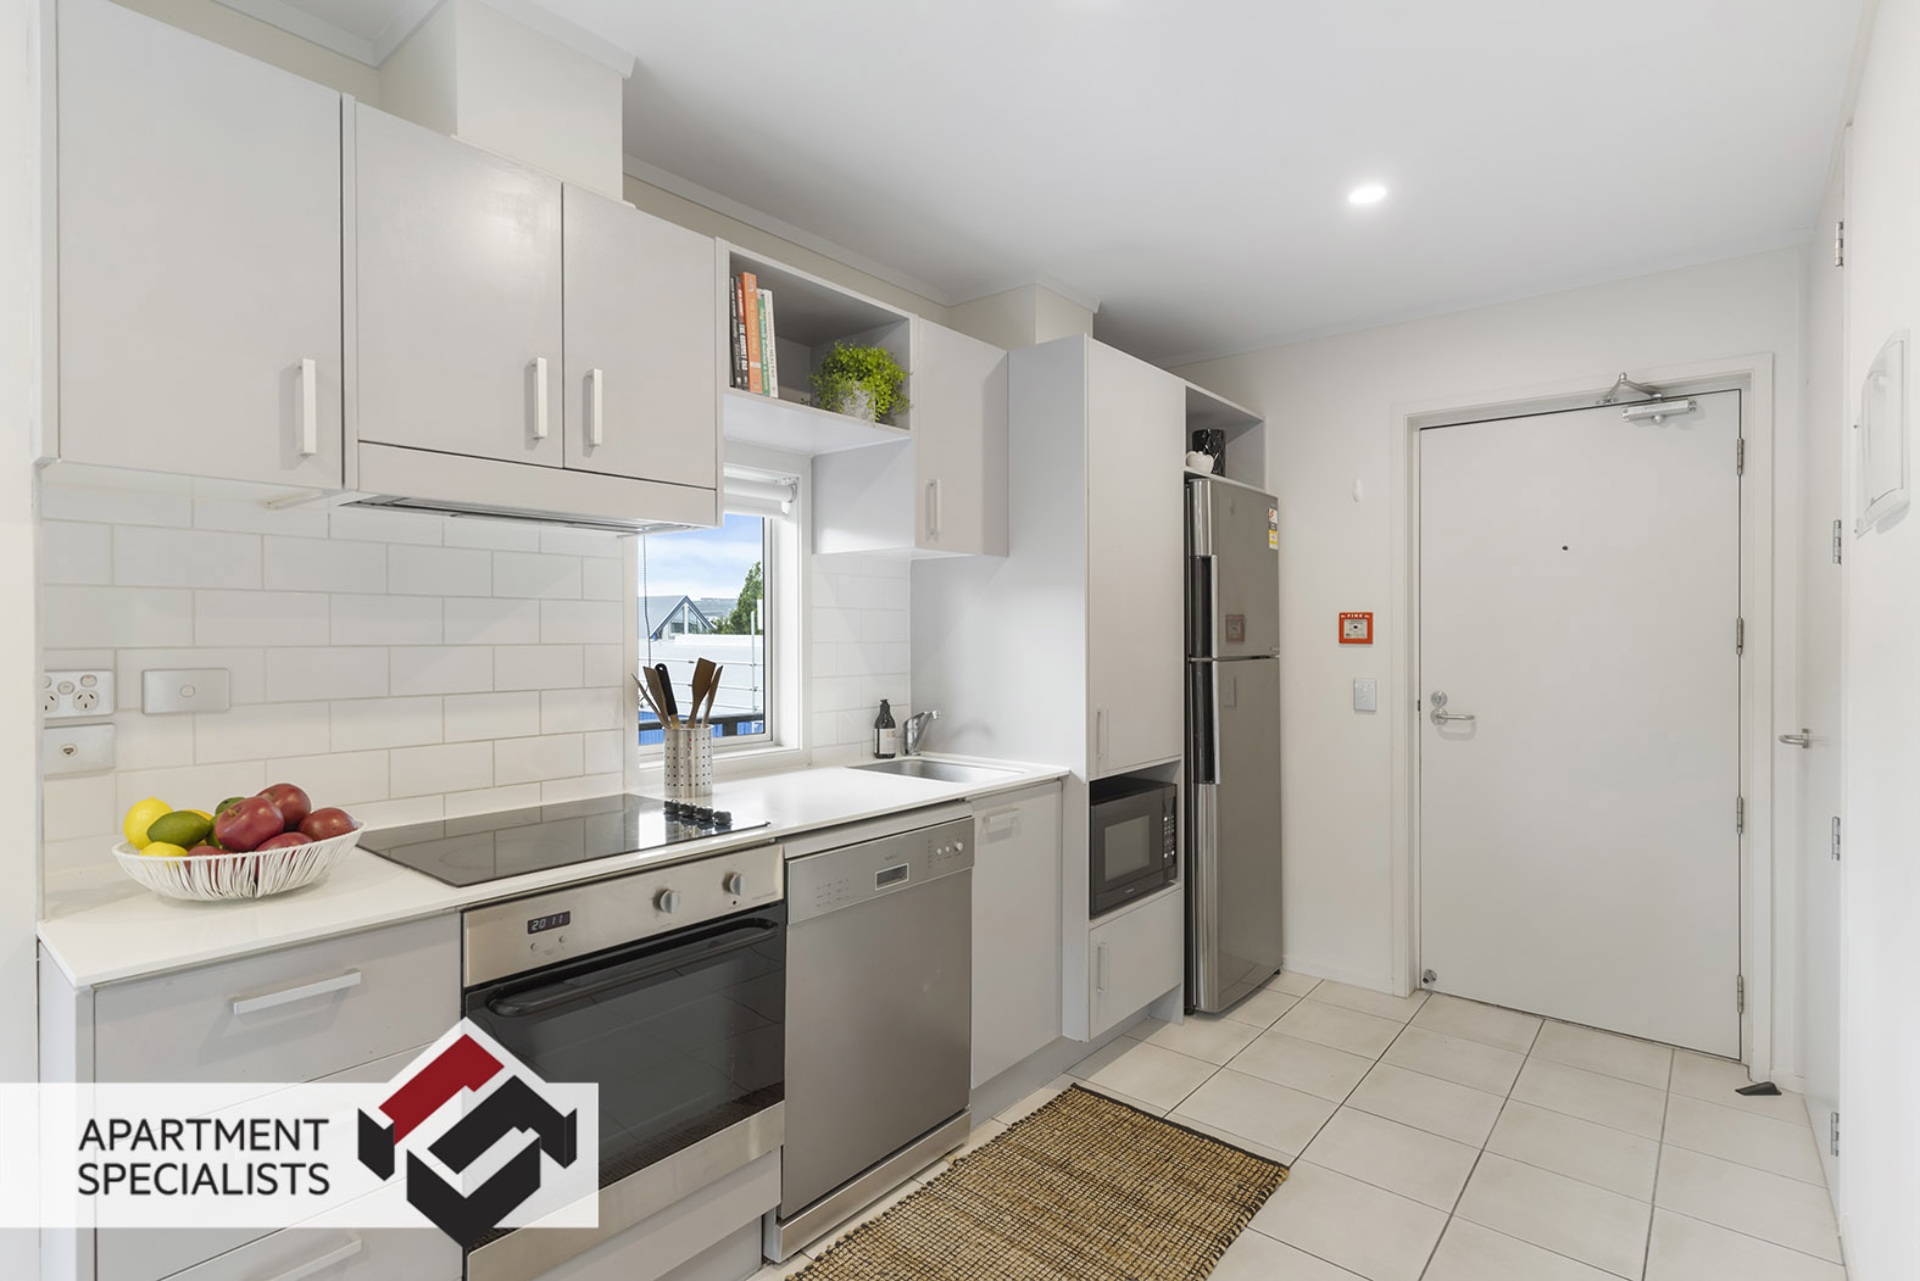 3 | 4 Kell Drive, Albany | Apartment Specialists